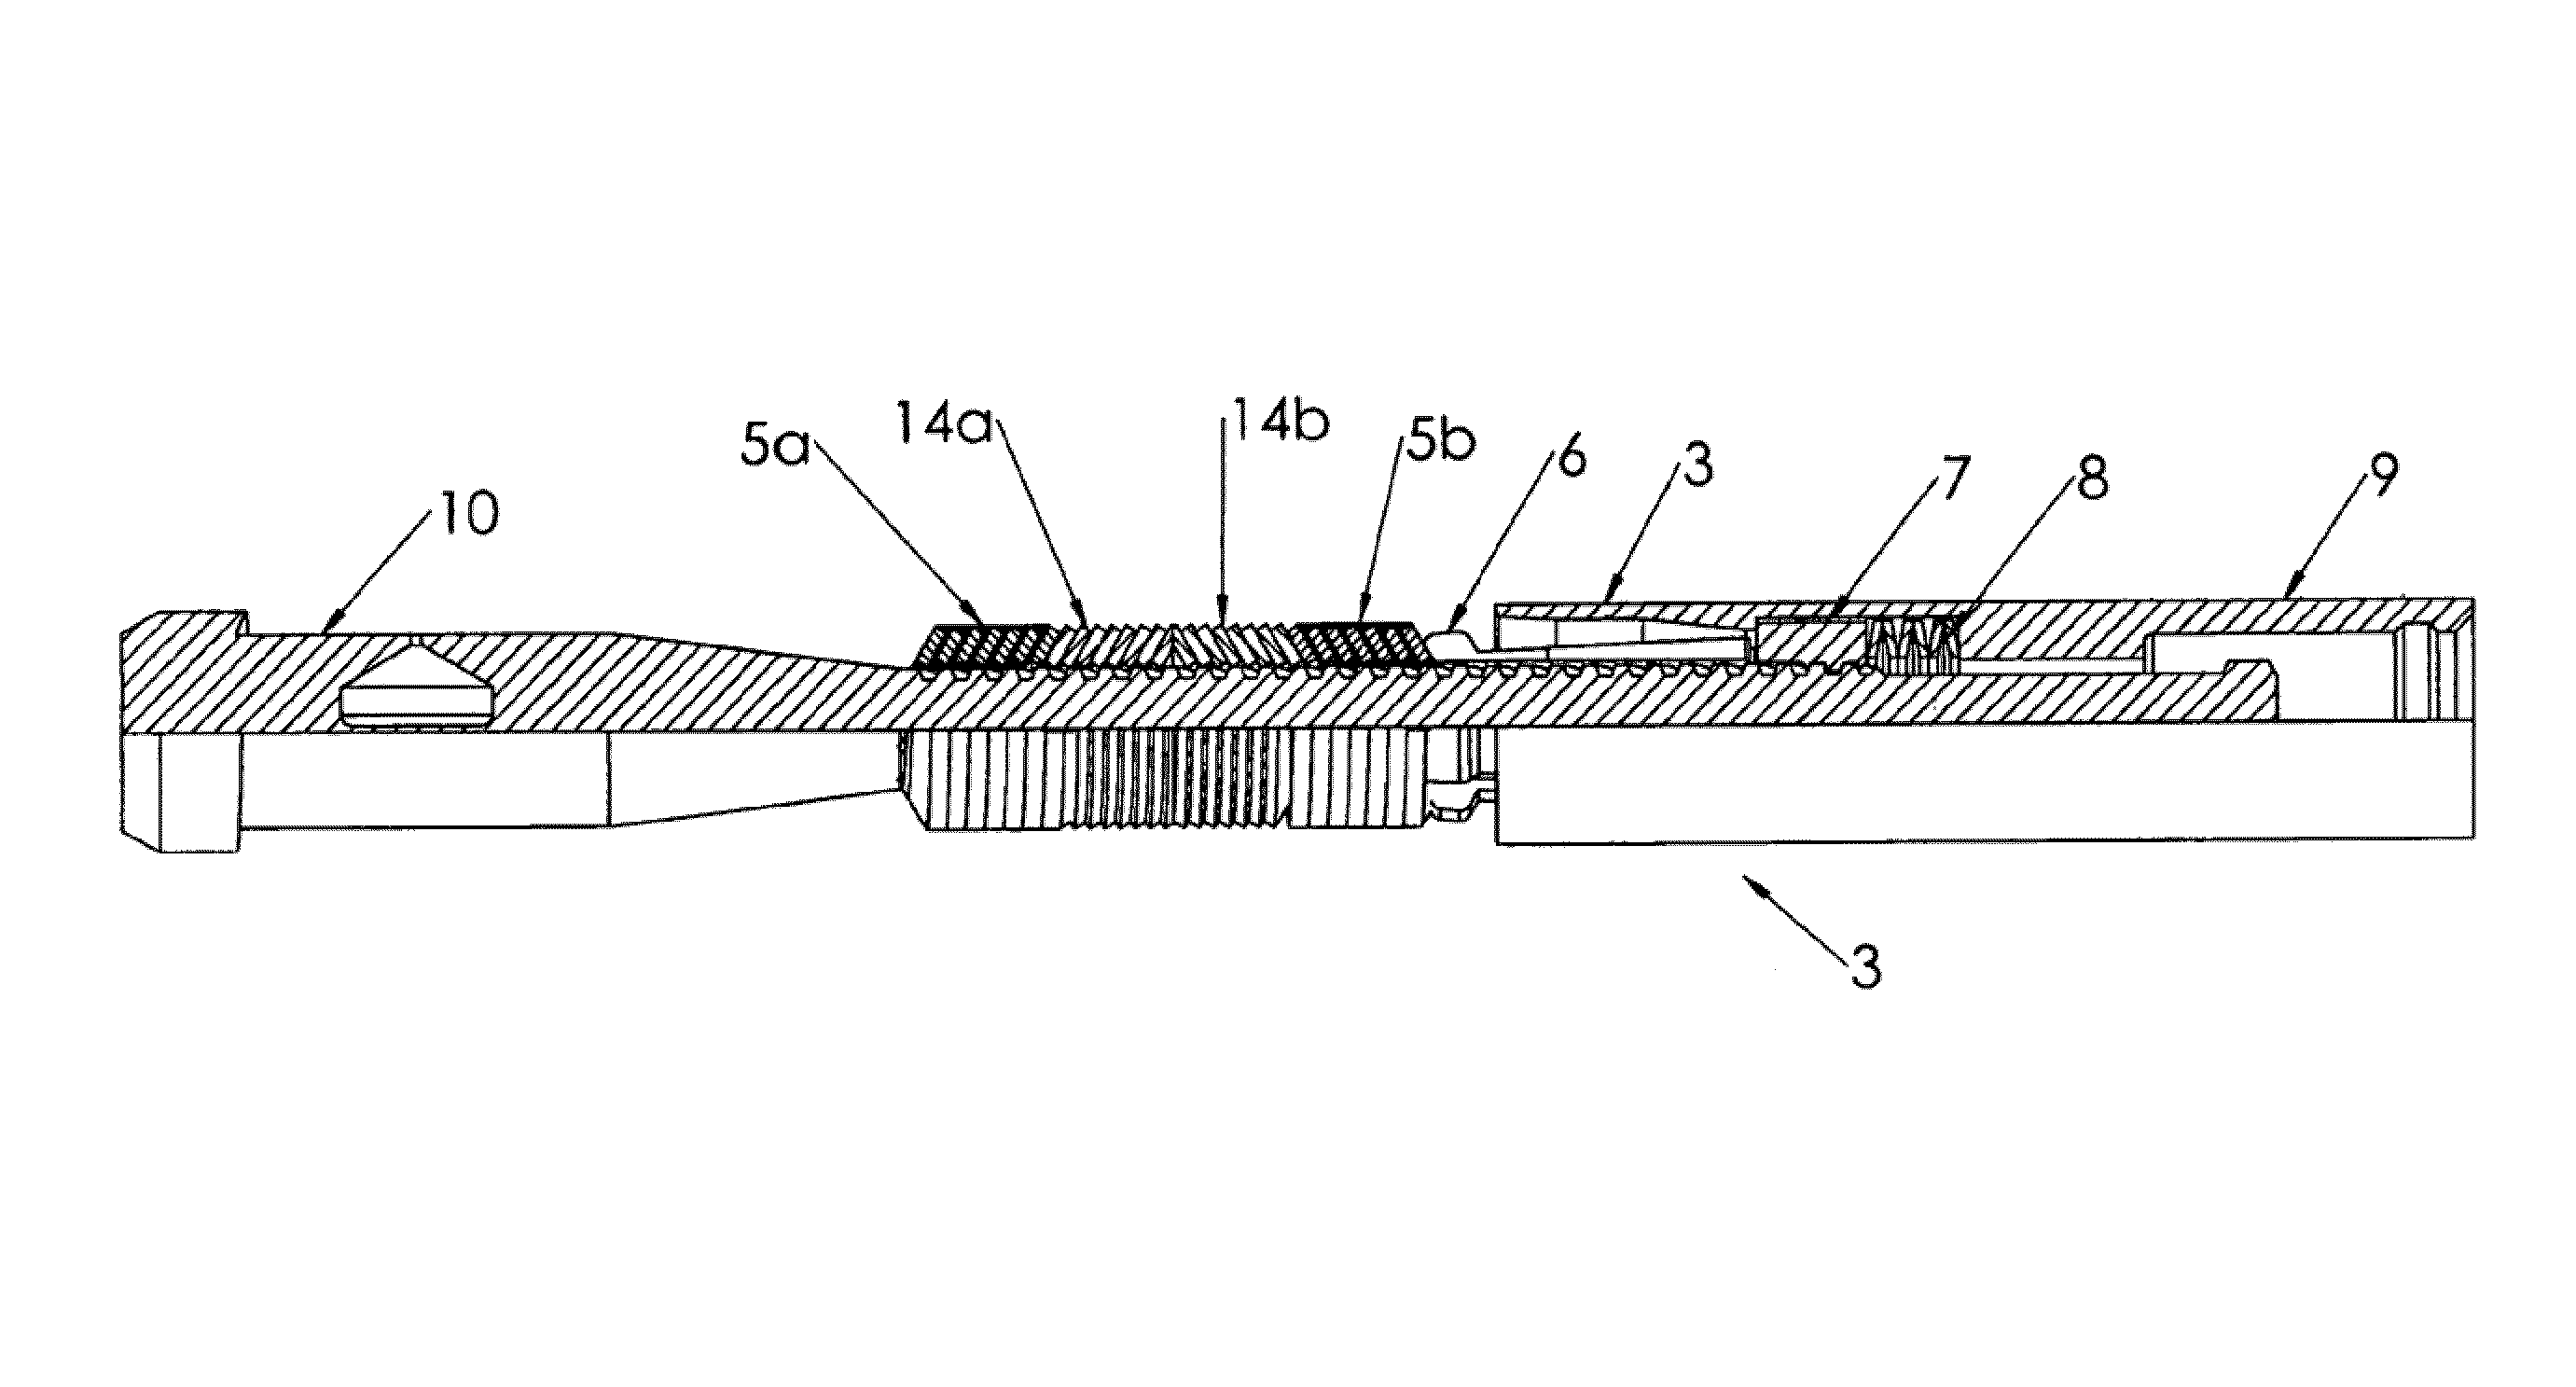 Sealing and anchoring device for use in a well